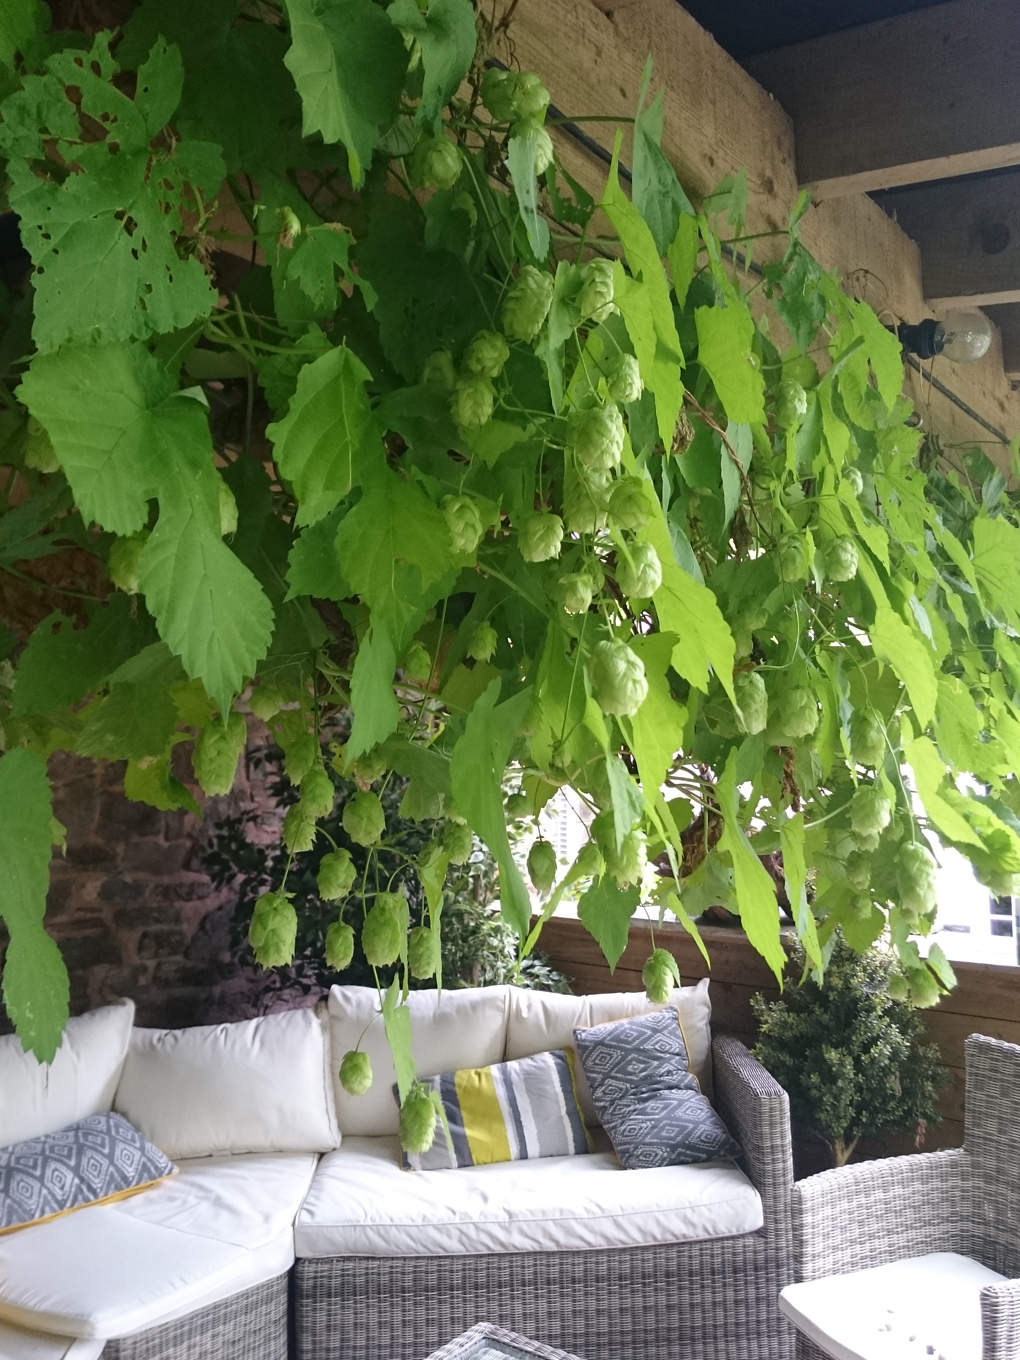 Luscious green Hops intertwined and hanging from a large wooden pergola shading a comfortable seating area with lots of cushions. A peaceful and pretty spot to sit and contemplate.